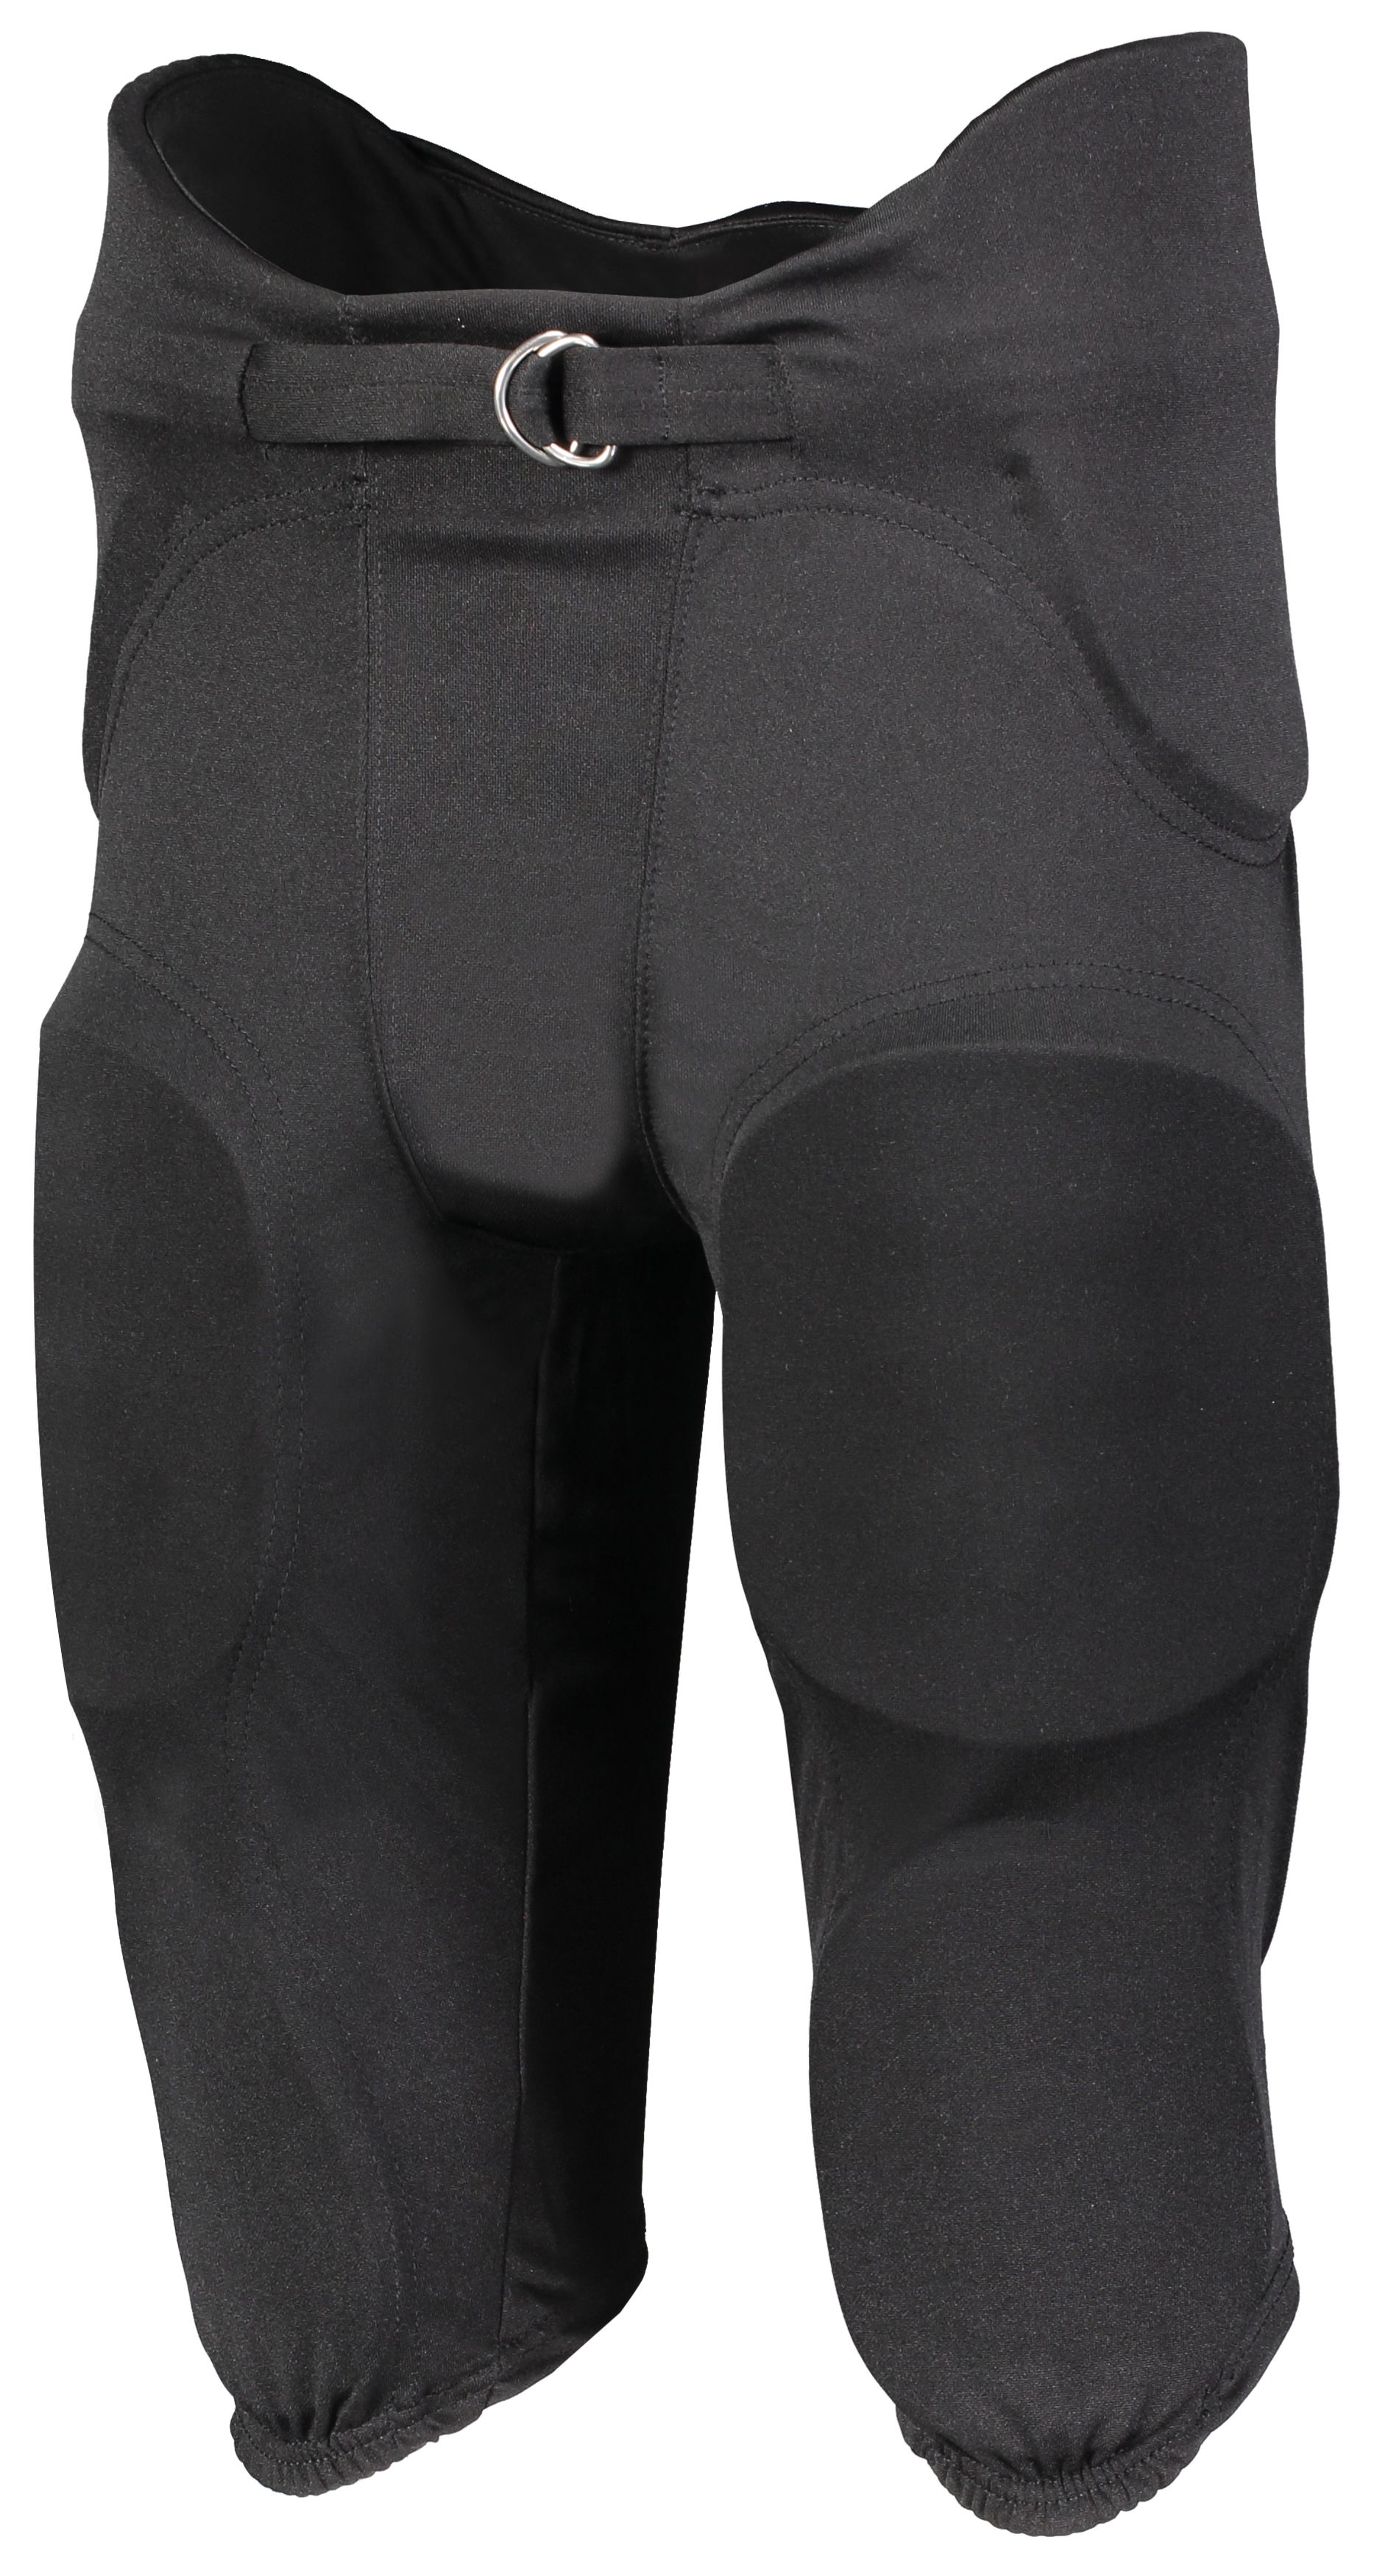 Russell F25PFP  Practice Football Pant